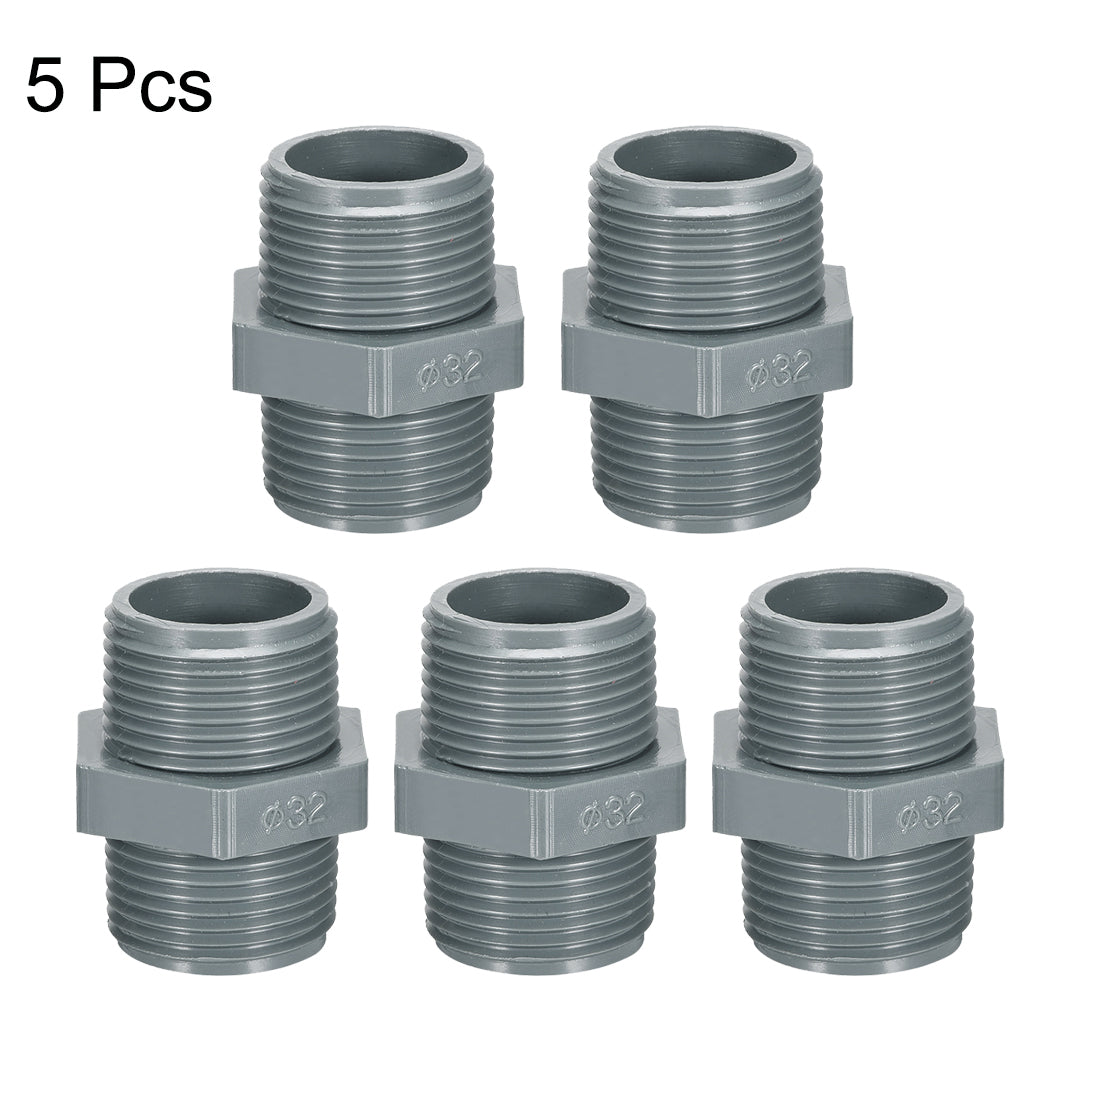 uxcell Uxcell Pipe Fittings Connector G1 x G1 Male Thread Adapter Plastic Hex Connector 5pcs